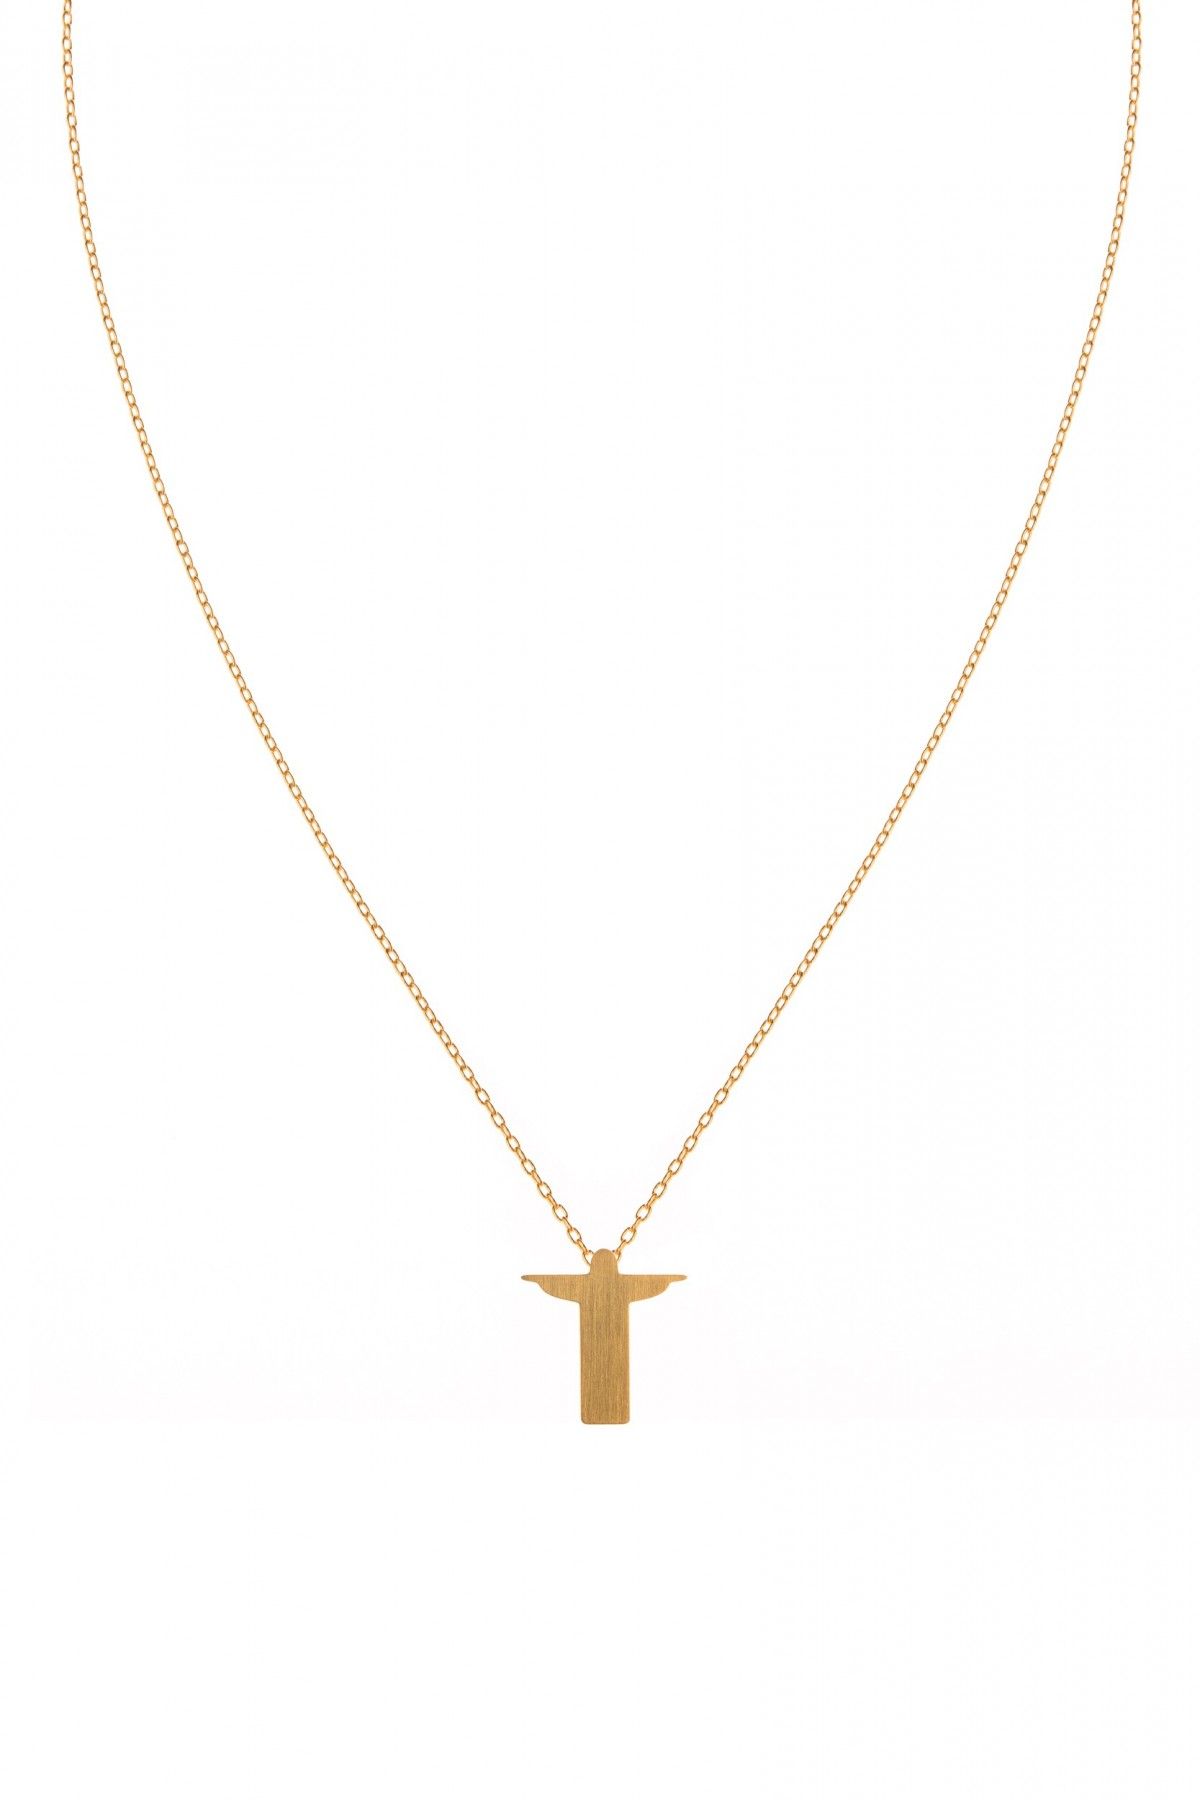 copy of Christ the Redeemer Necklace